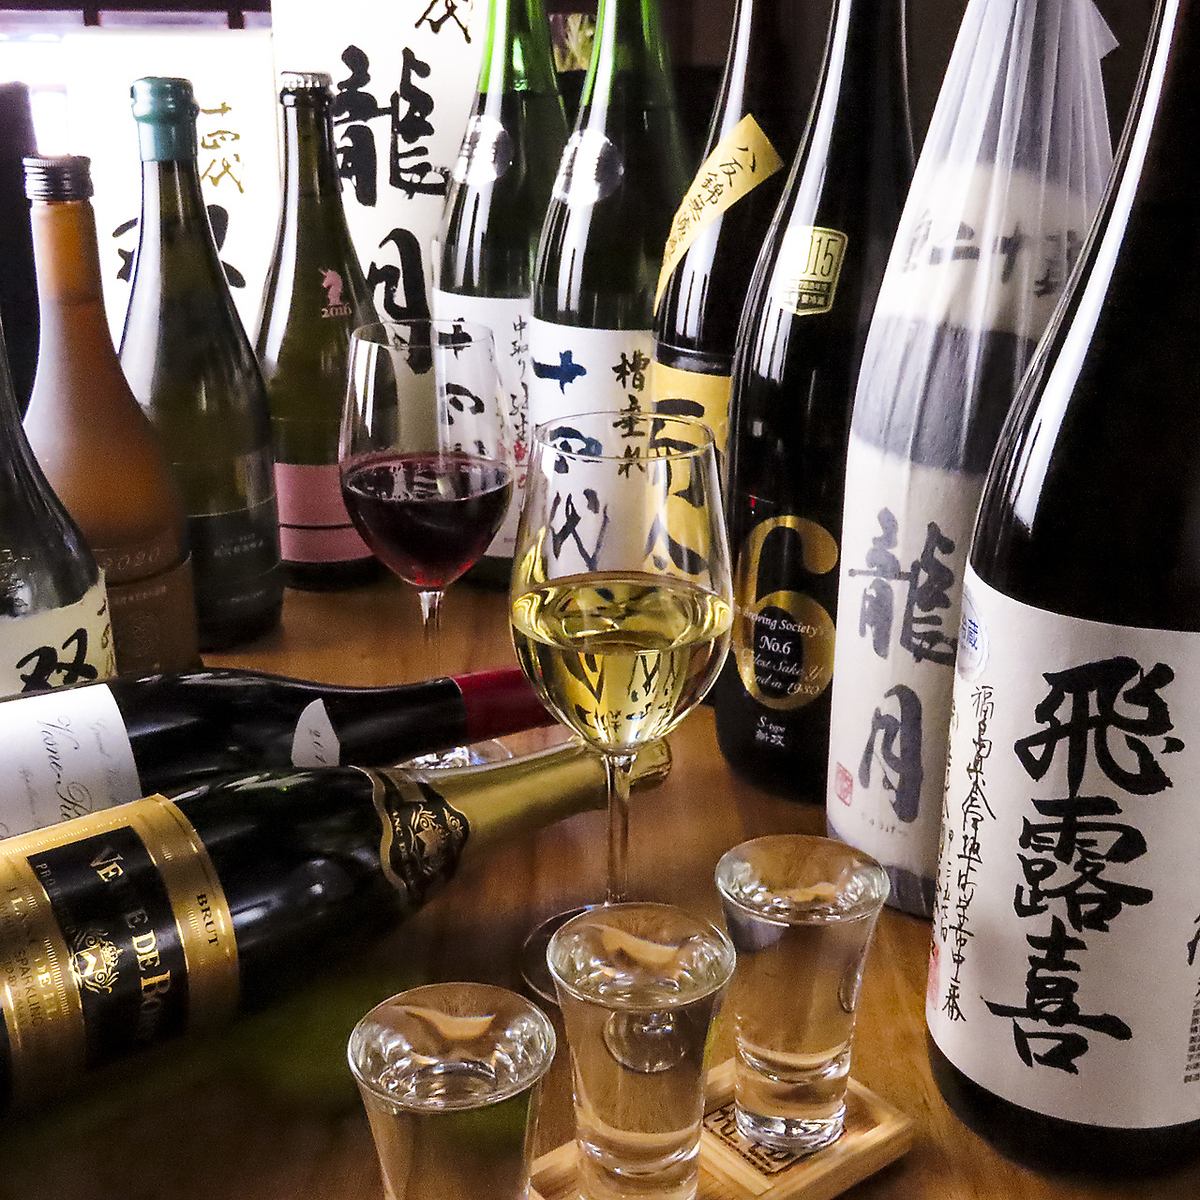 A must-have for sake lovers! We also have a wide selection of snacks available!